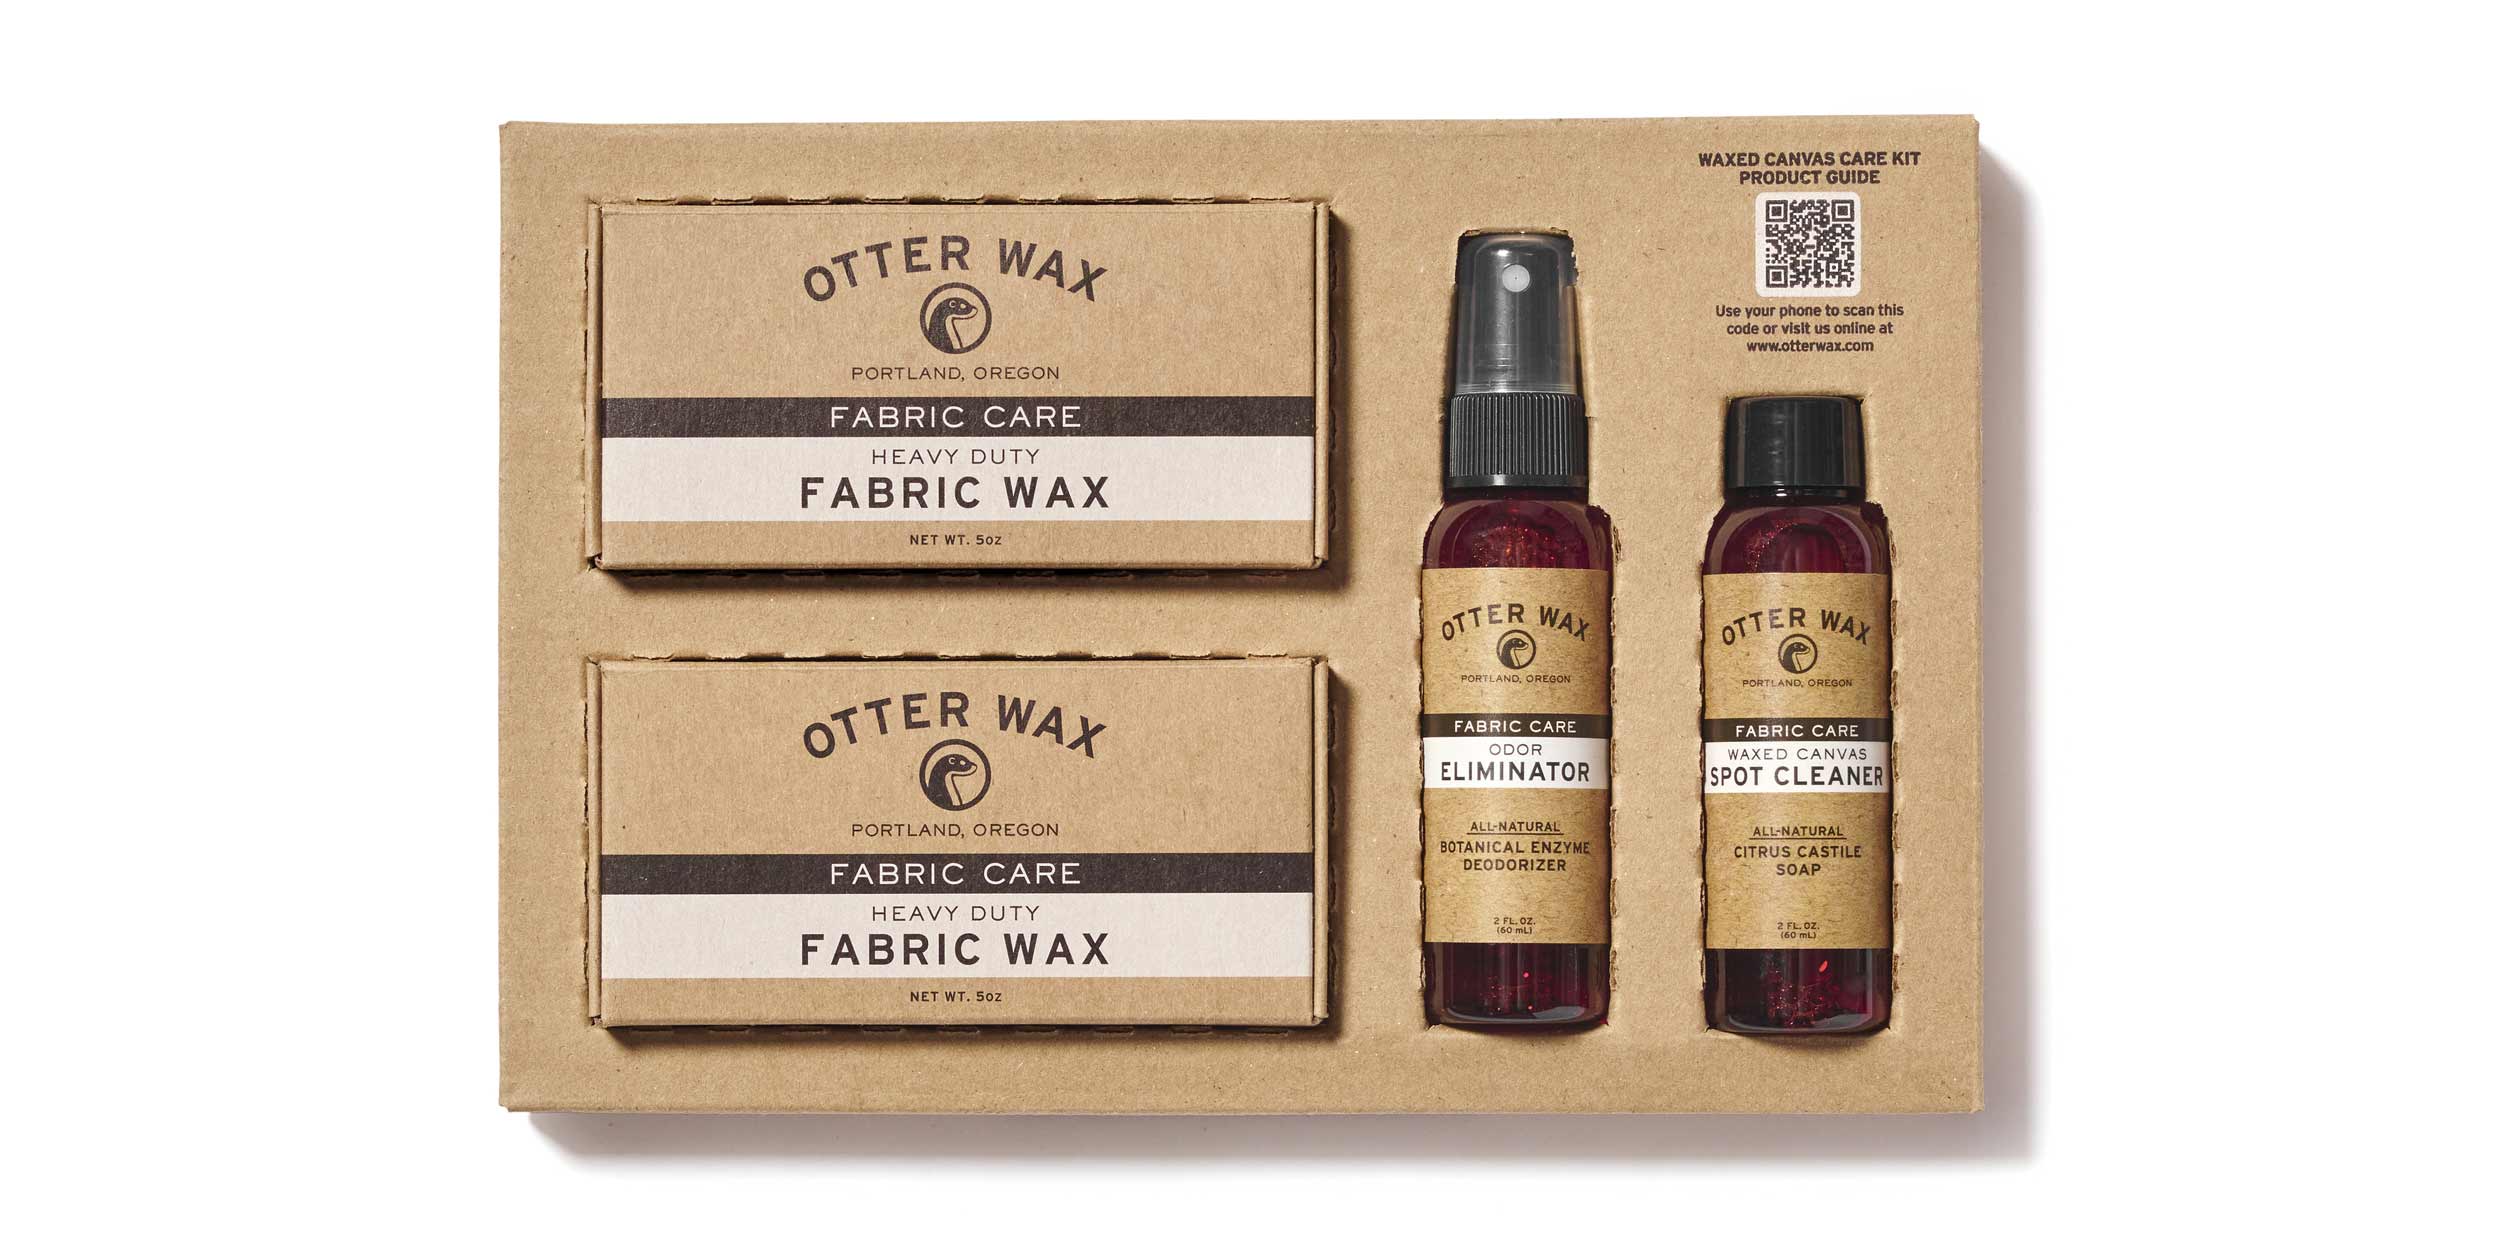 Standard Essentials Otter Wax Waxed Canvas Care Kit For Protective Waterproofing Fabric And Canvas